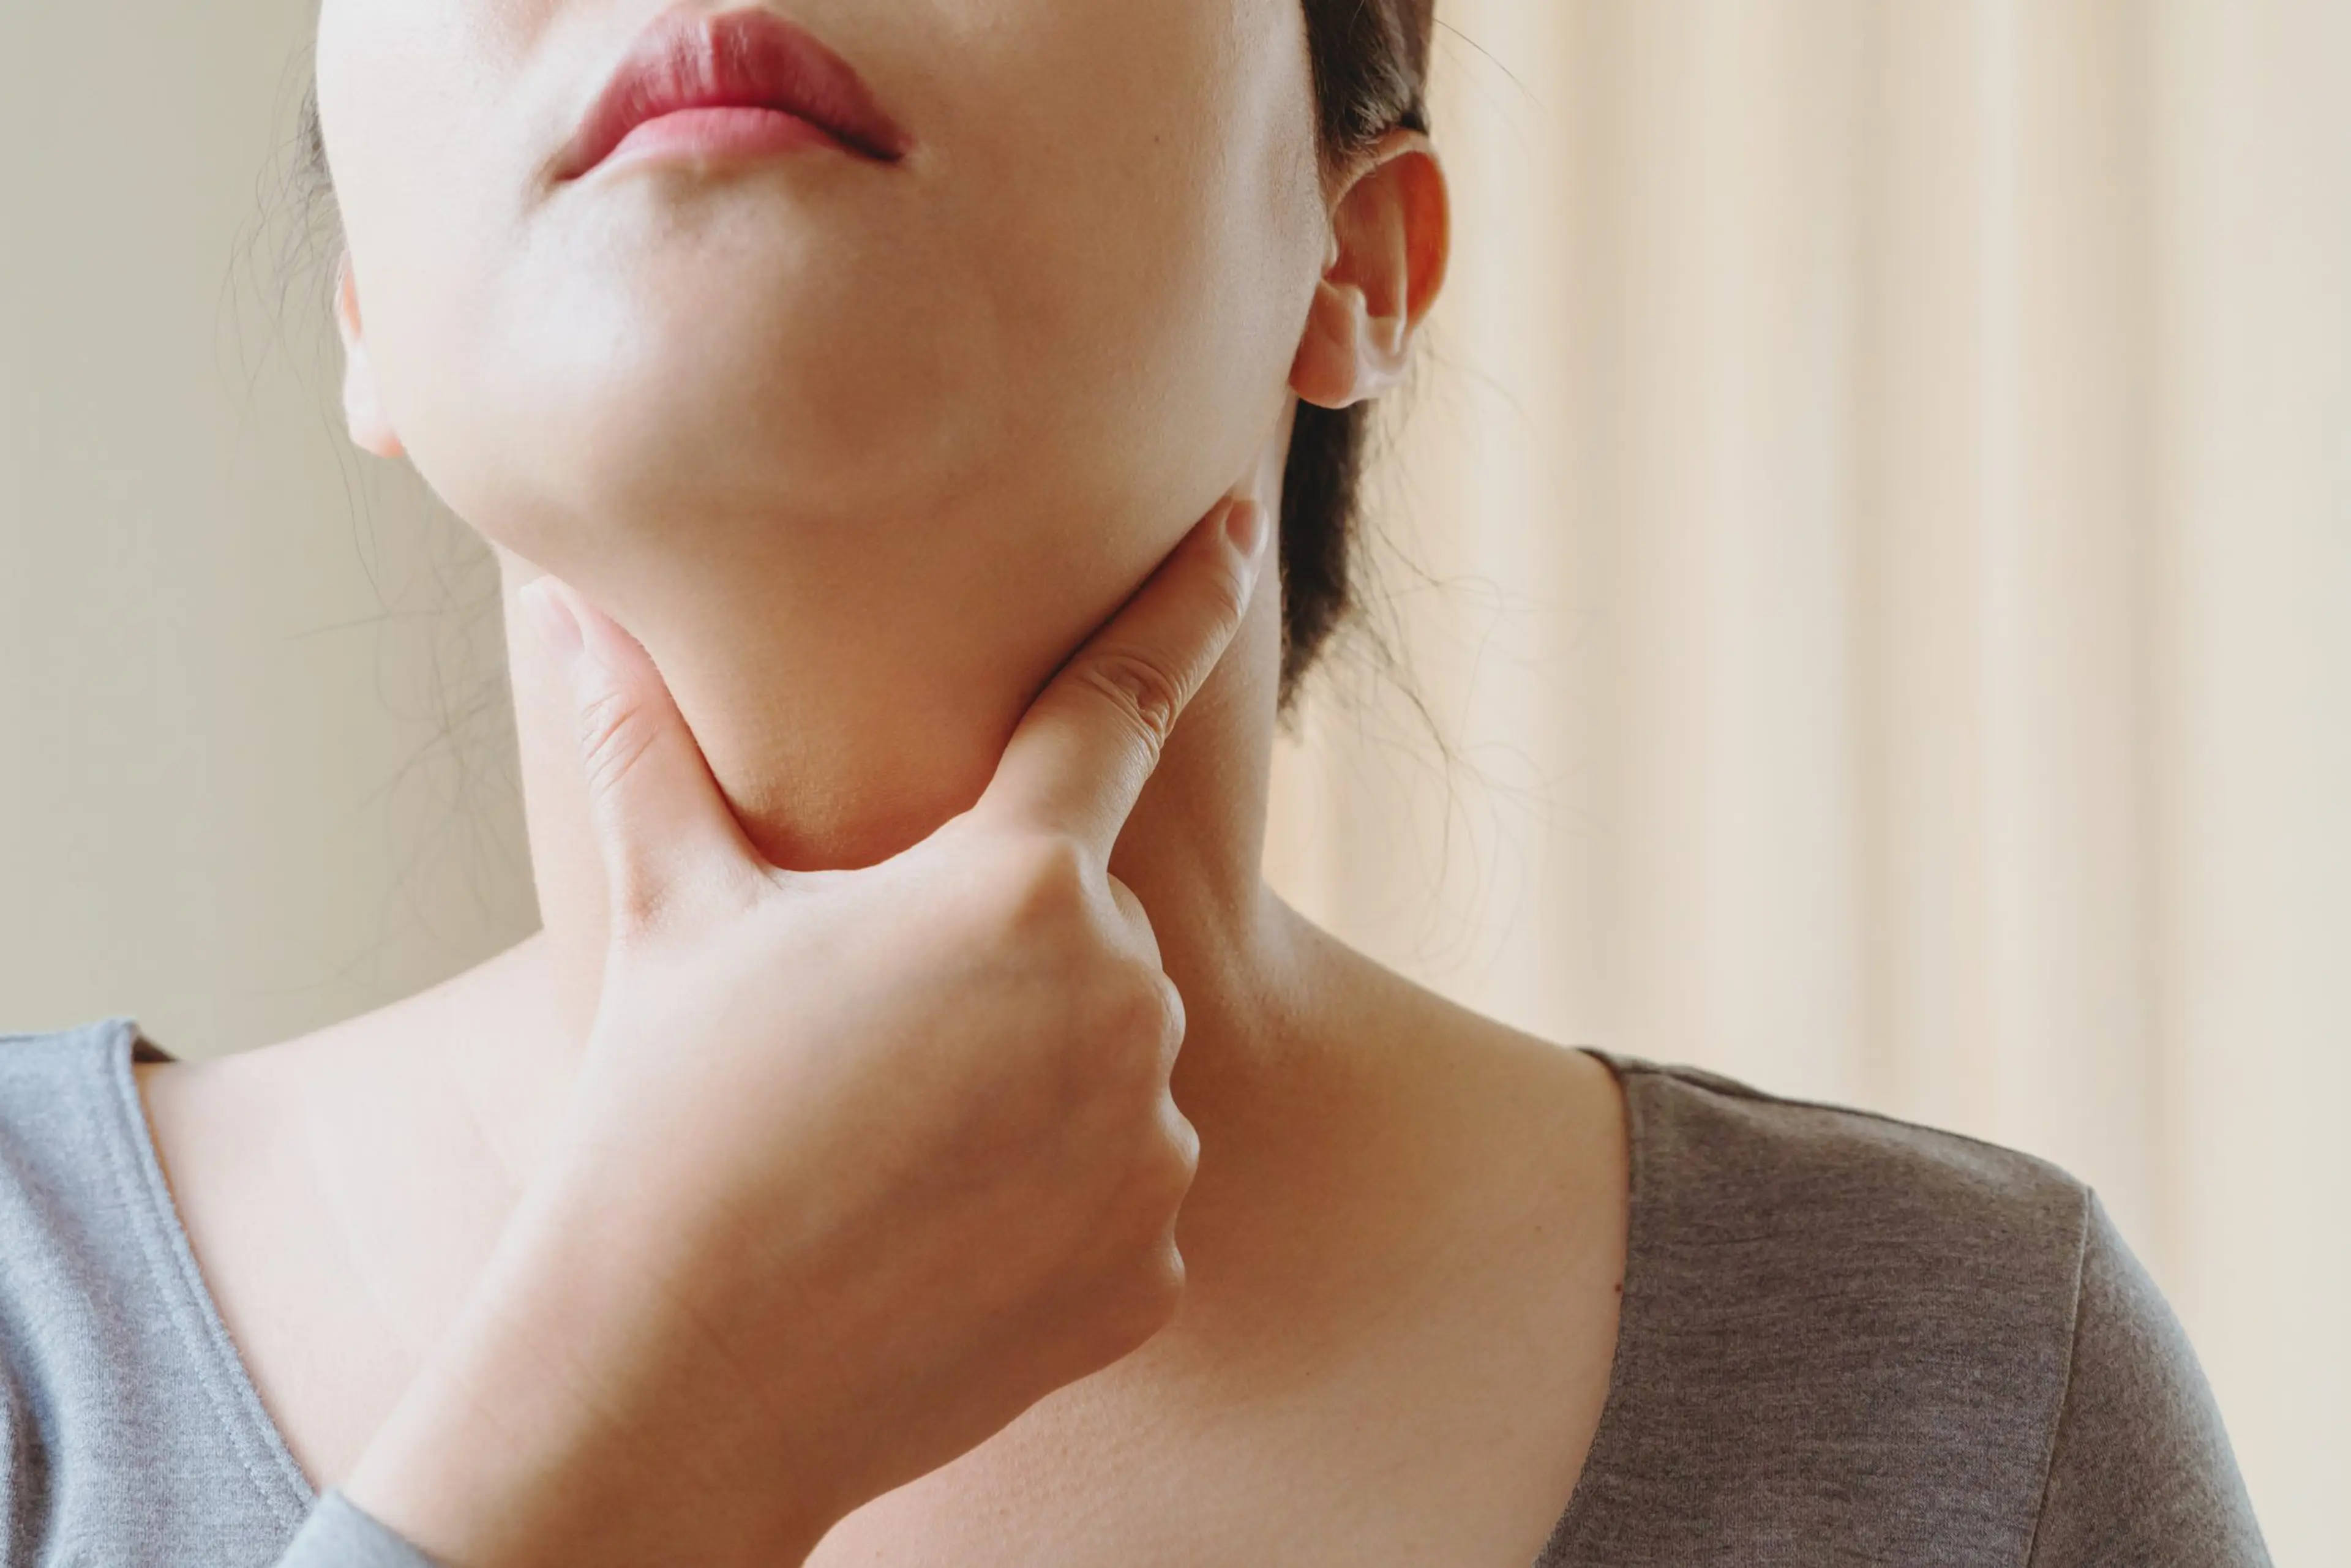 What You Require To Know About Thyroid Disorders